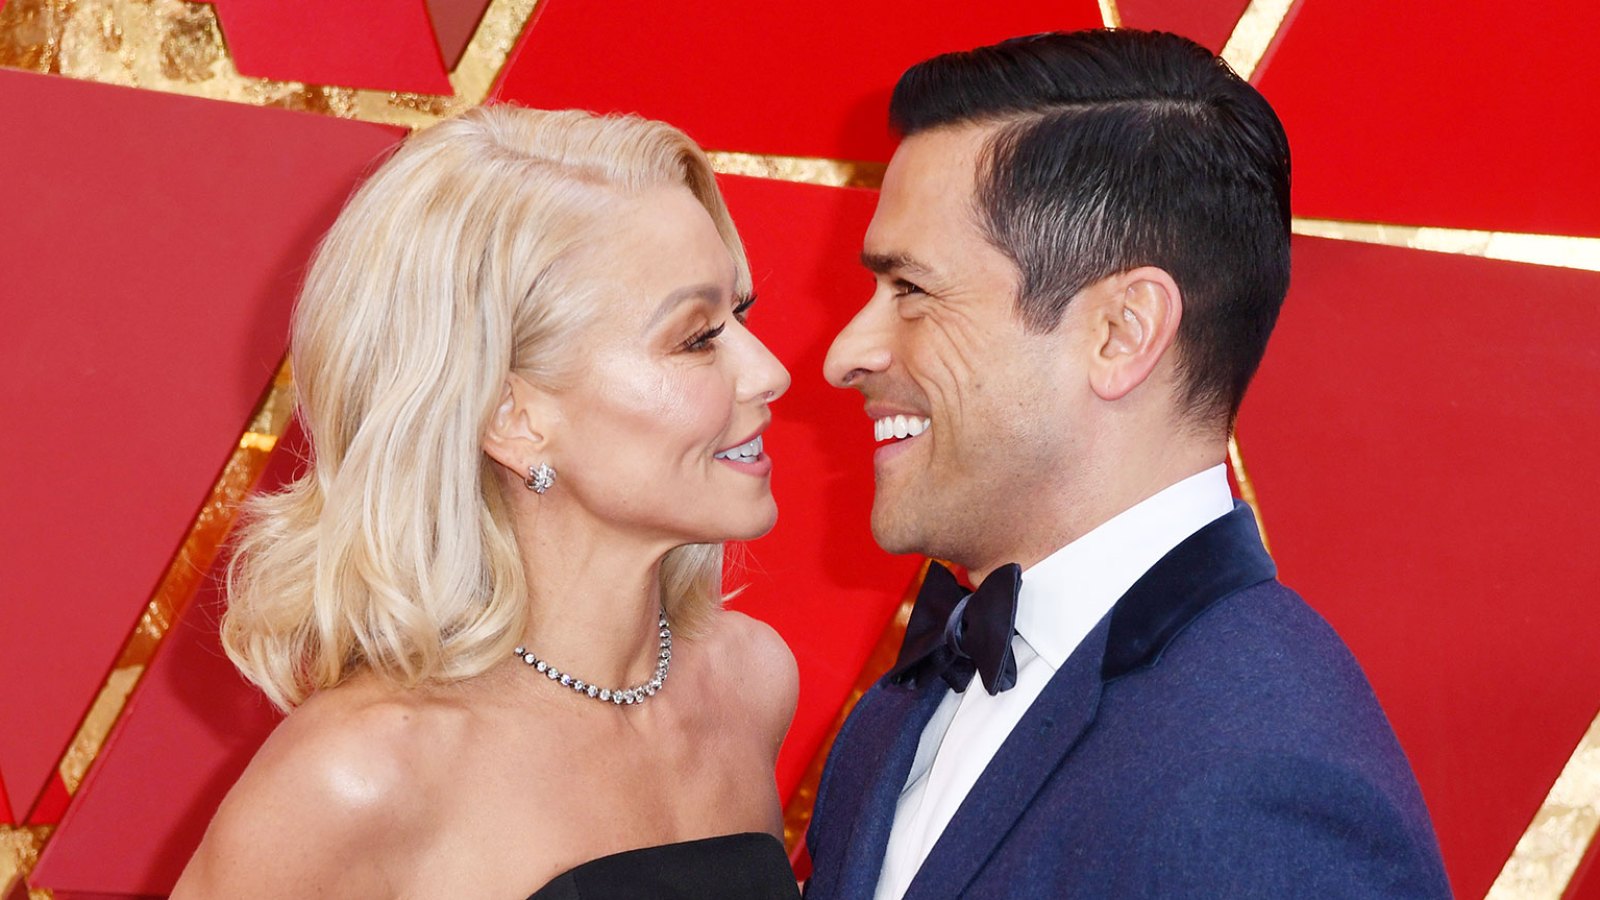 Kelly Ripa and Mark Consuelos attend the 90th Annual Academy Awards Kelly Ripa and Mark Consuelos Still Have an Infectious Energy Together As She Turns 50